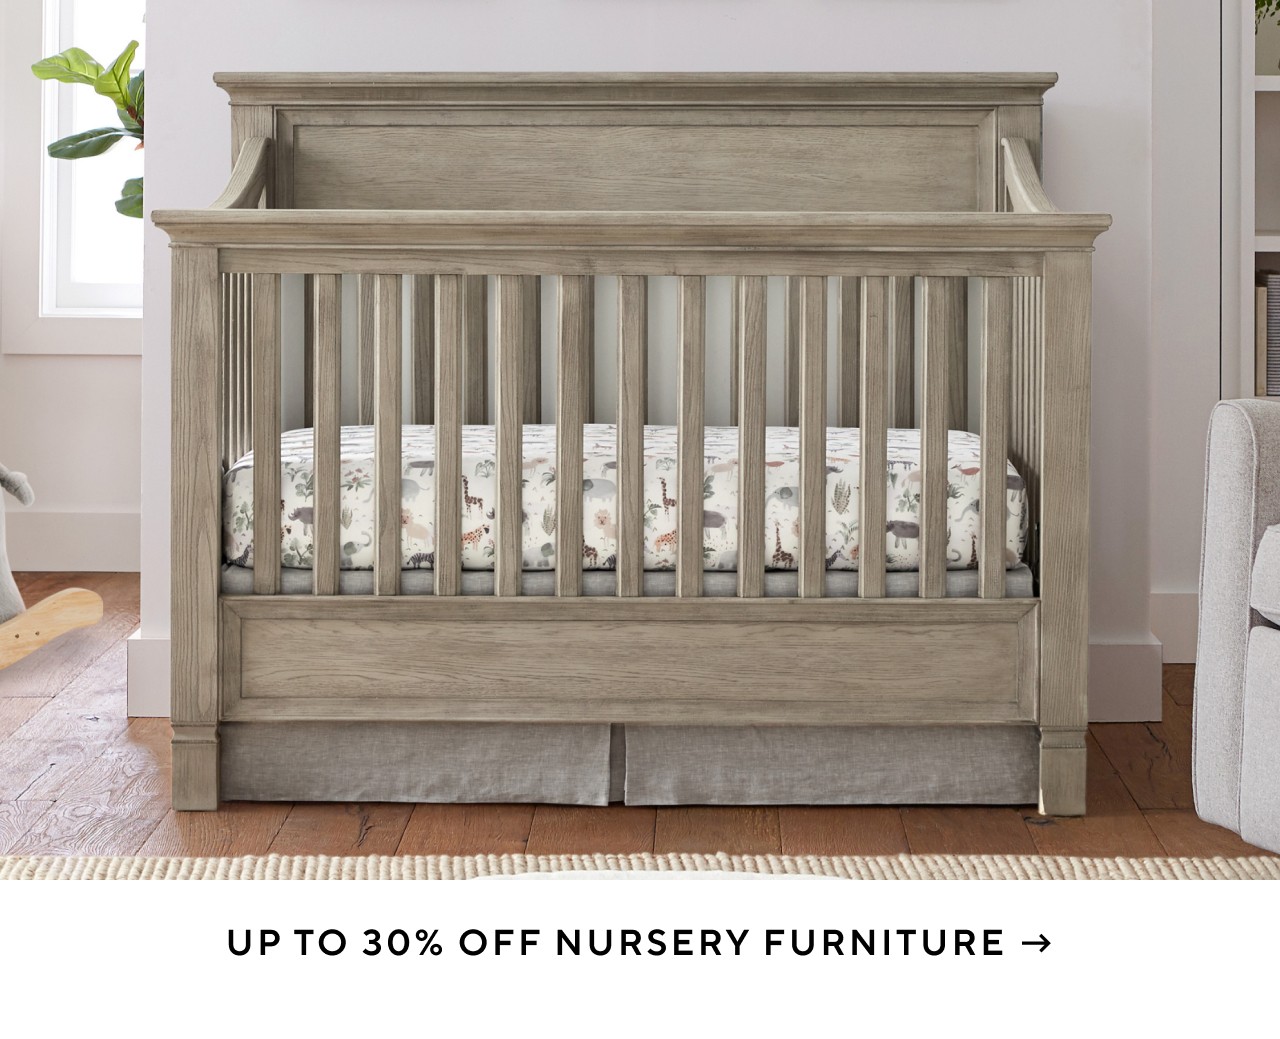 UP TO 30% OFF NURSERY FURNITURE